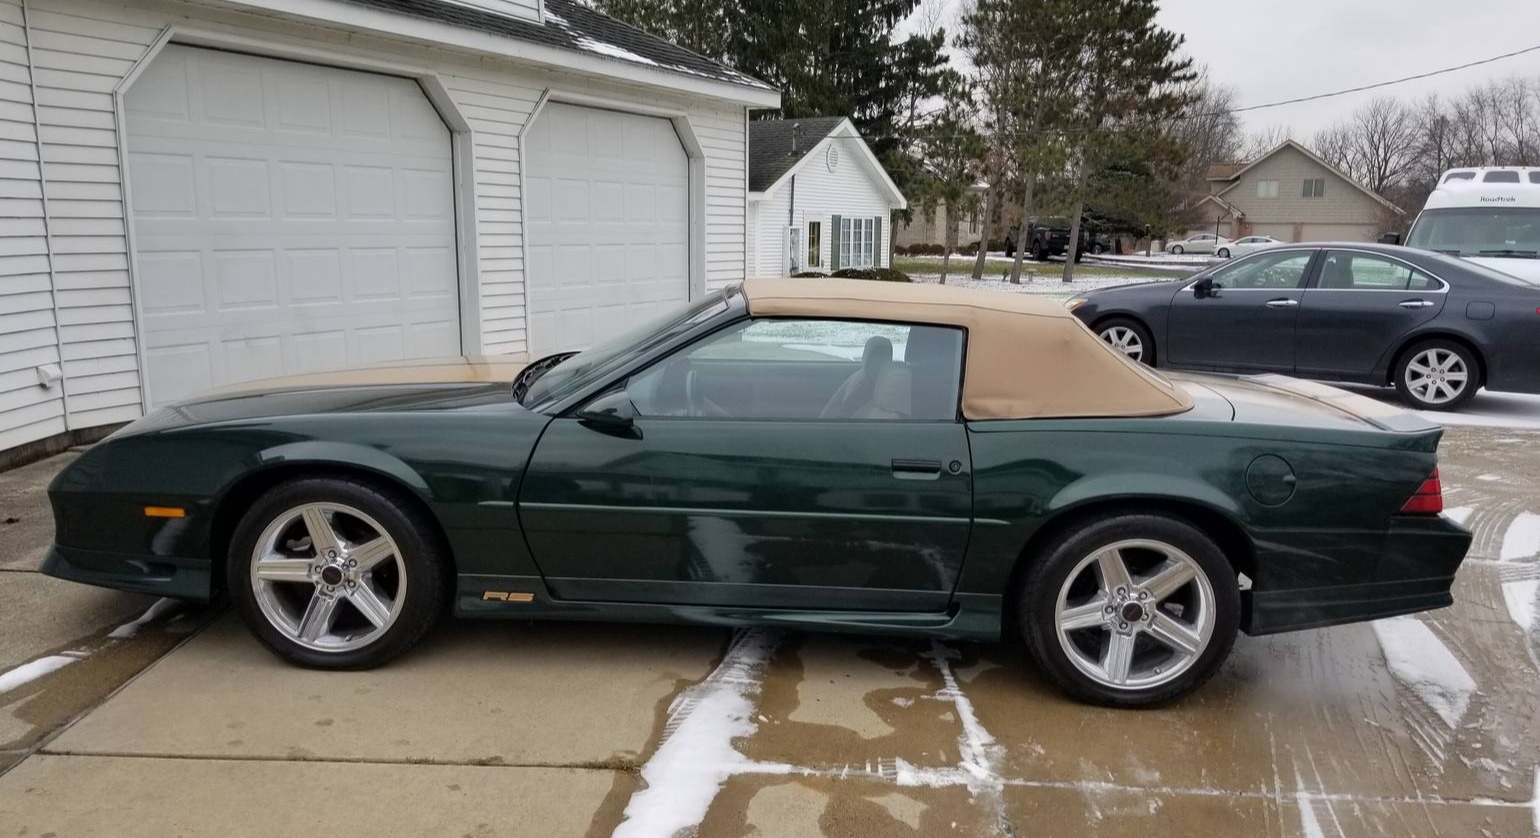 last-and-best-of-the-3rd-gen-camaros-18k-mile-1992-camaro-rs-convertible77516968-770-0@2X